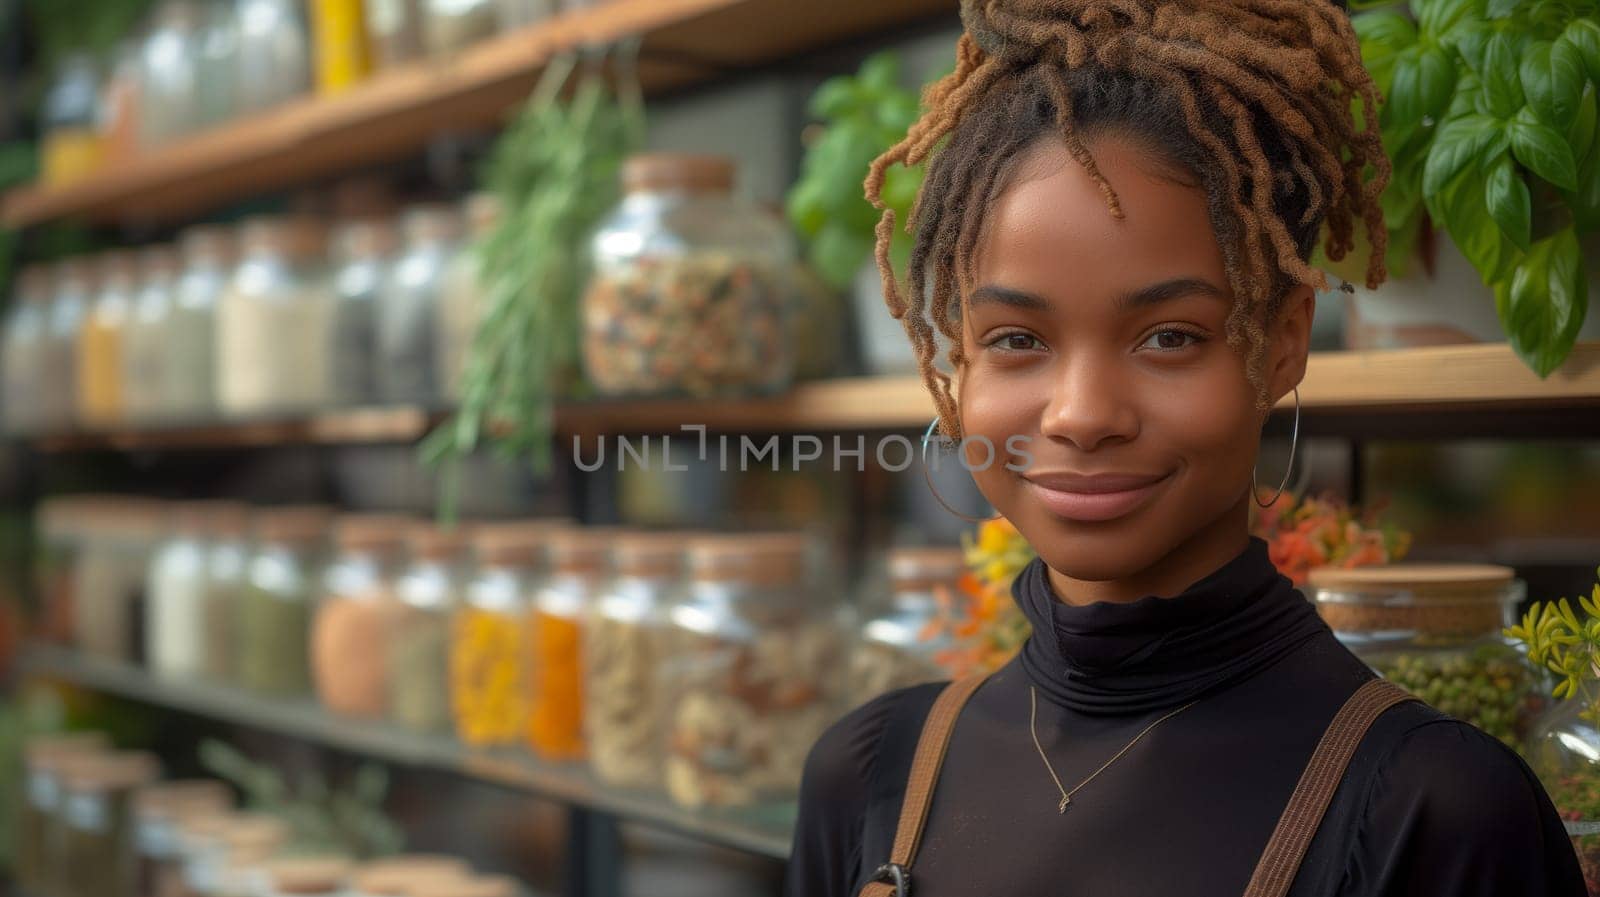 A happy customer with dreadlocks is smiling in front of a shelf filled with jars of spices at a retail store. Surrounded by natural foods and whole food products